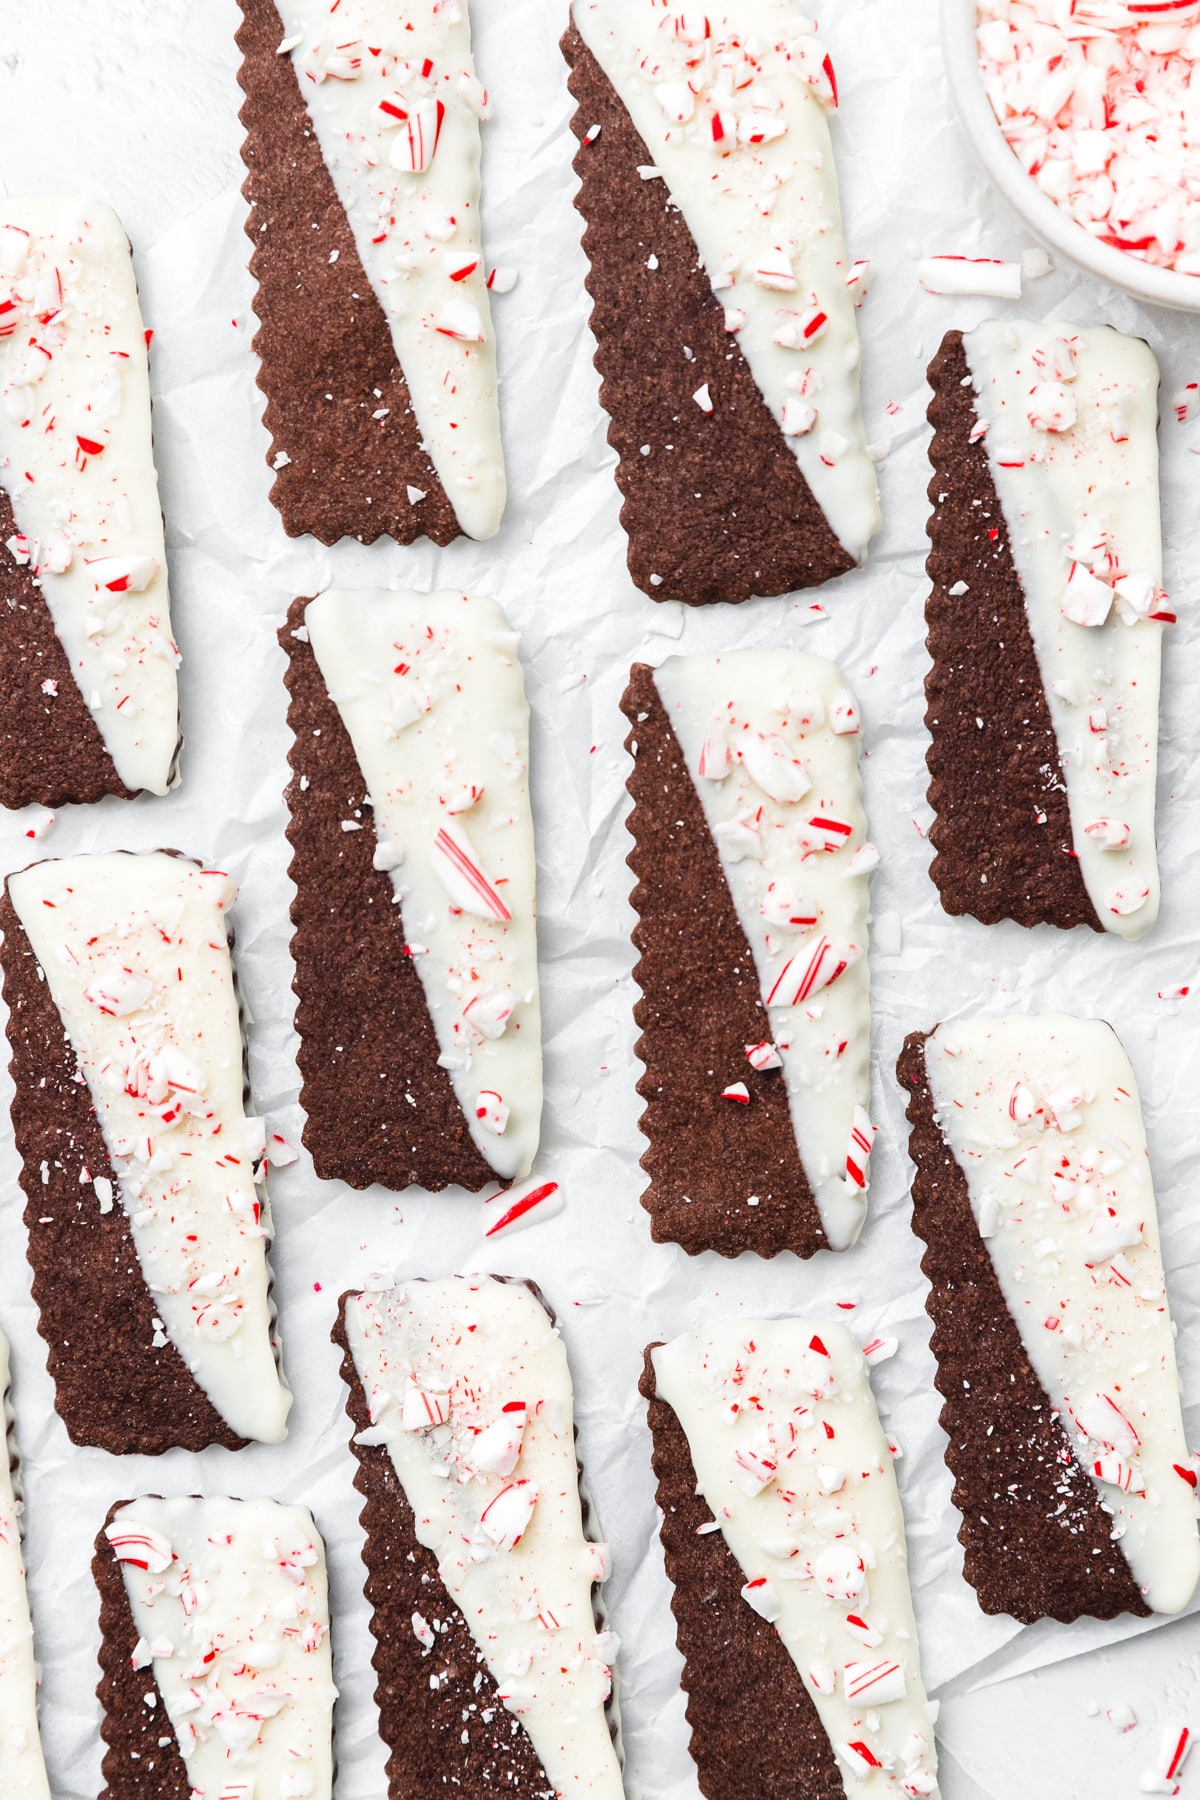 chocolate shortbread cookies dipped in white chocolate.